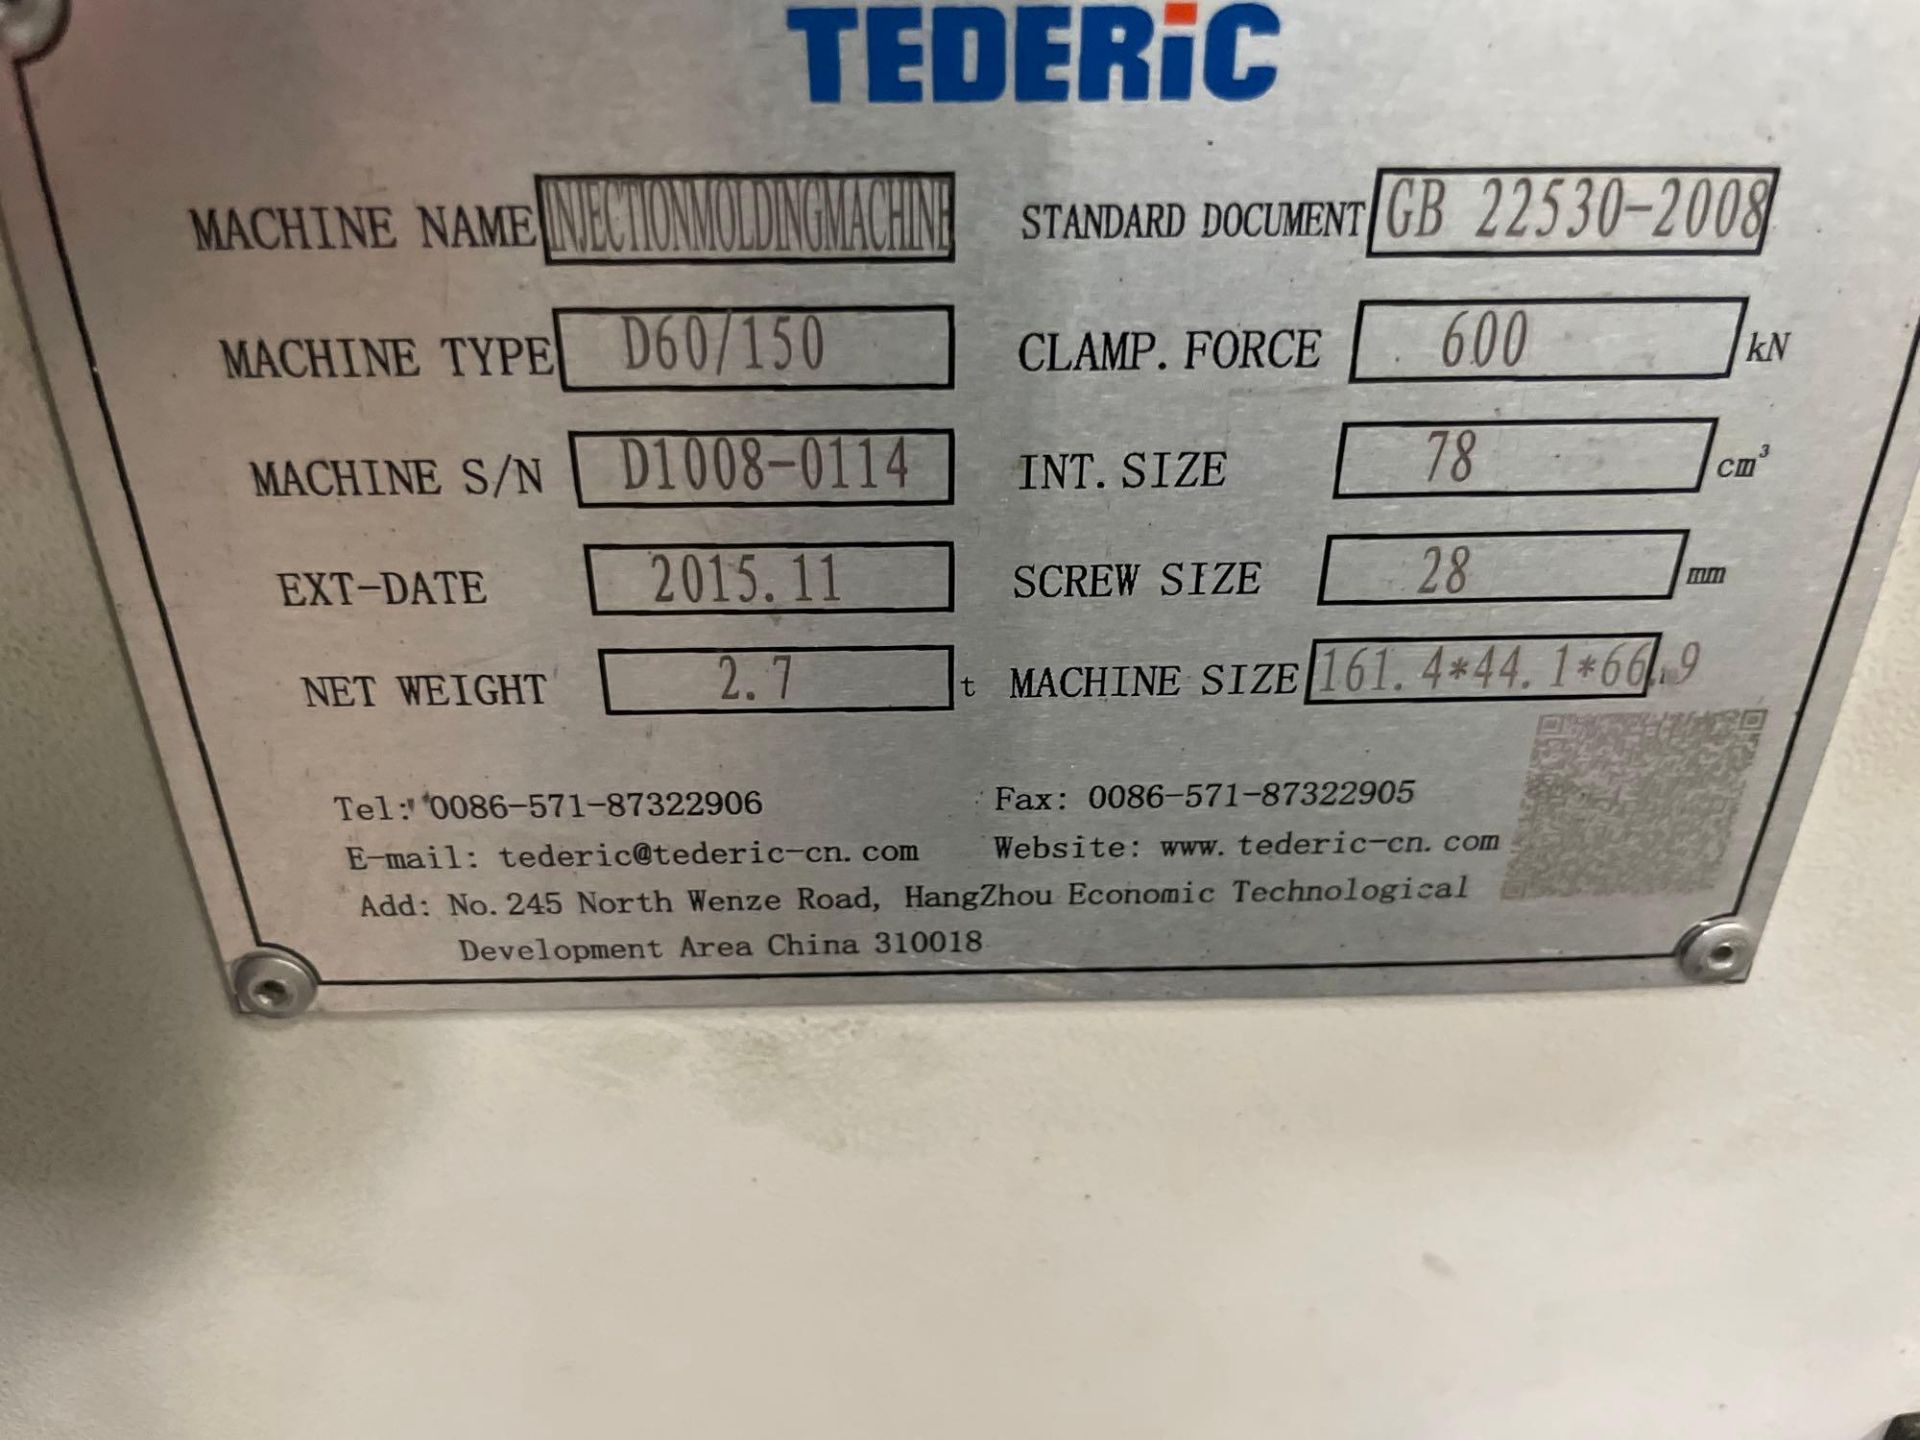 66 Ton Tederic D60/150 Plastic Injection Molder, Gefran GF Vedo 104 Control, s/n D1008-0114, New - Image 23 of 23